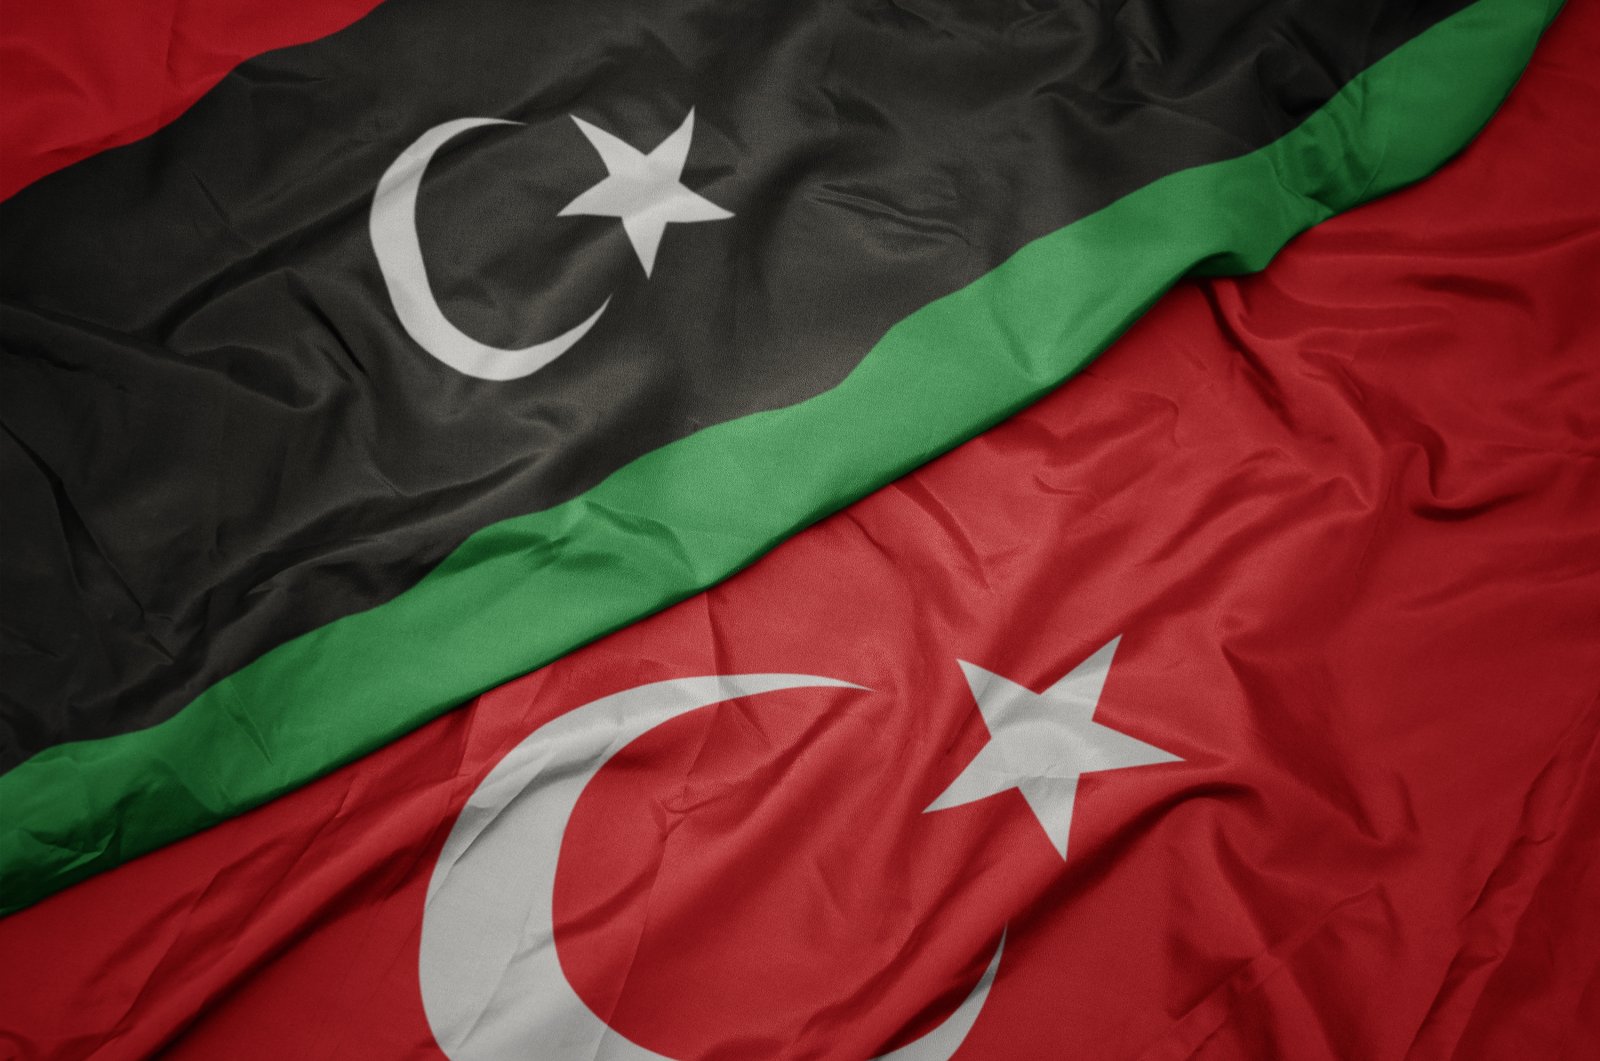 The flags of Turkey and Libya. (Shutterstock File Photo)